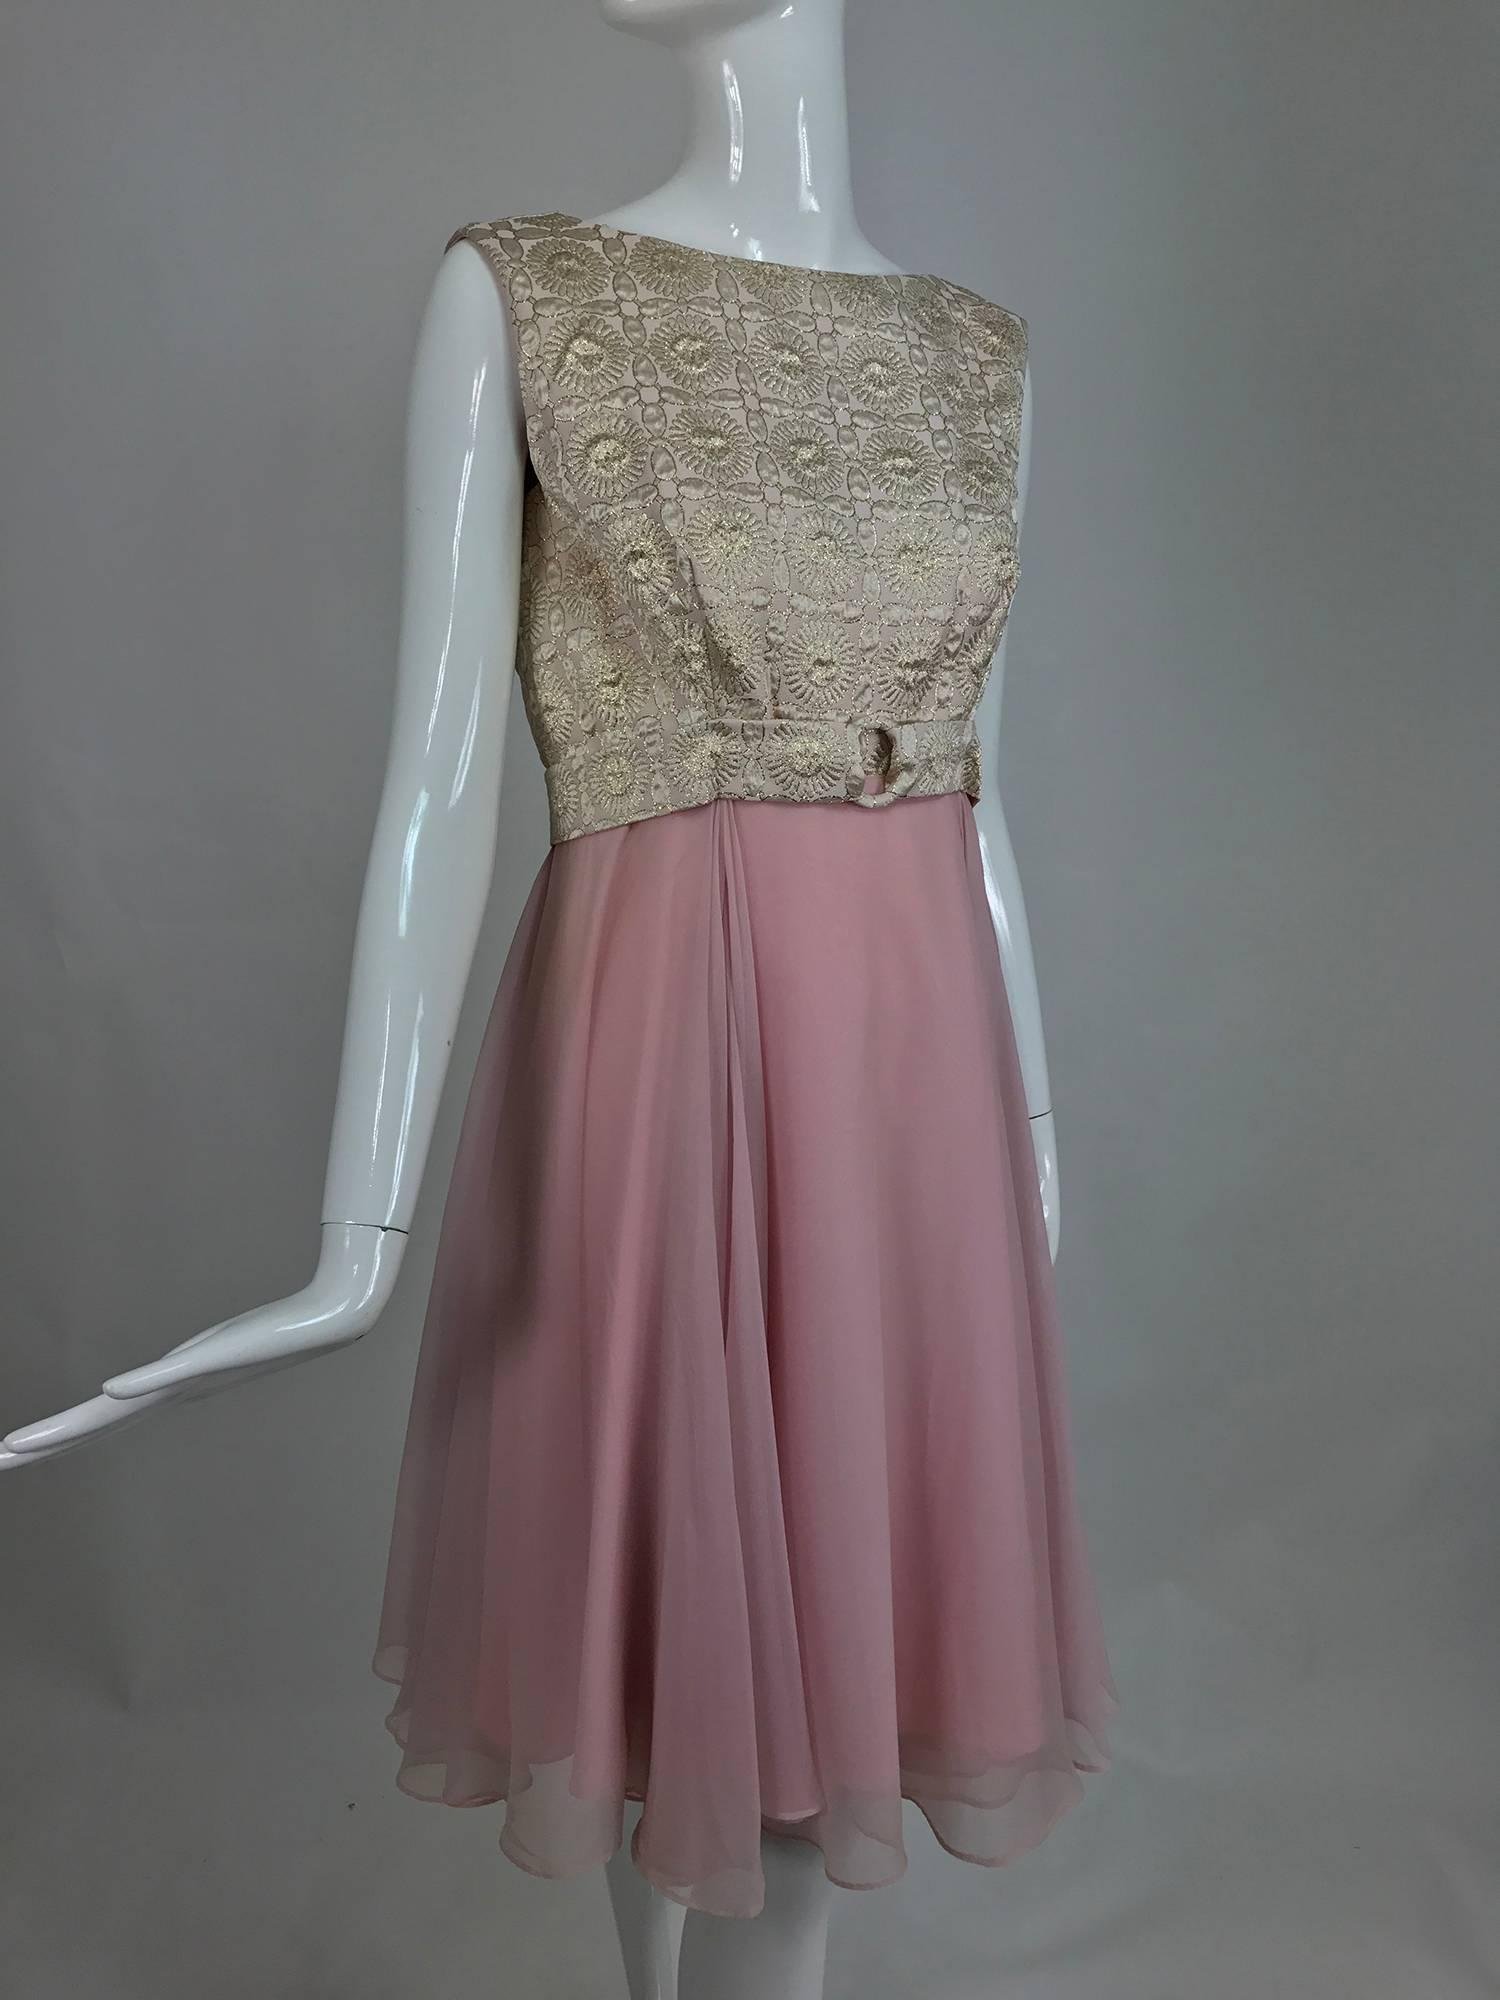 Vintage pink chiffon and gold metallic brocade cocktail dress from the 1960s...Classic early 1960s cocktail dress that is still fashionable today...The sleeveless bodice is pink and gold metallic brocade with a matching belt, the full skirt is